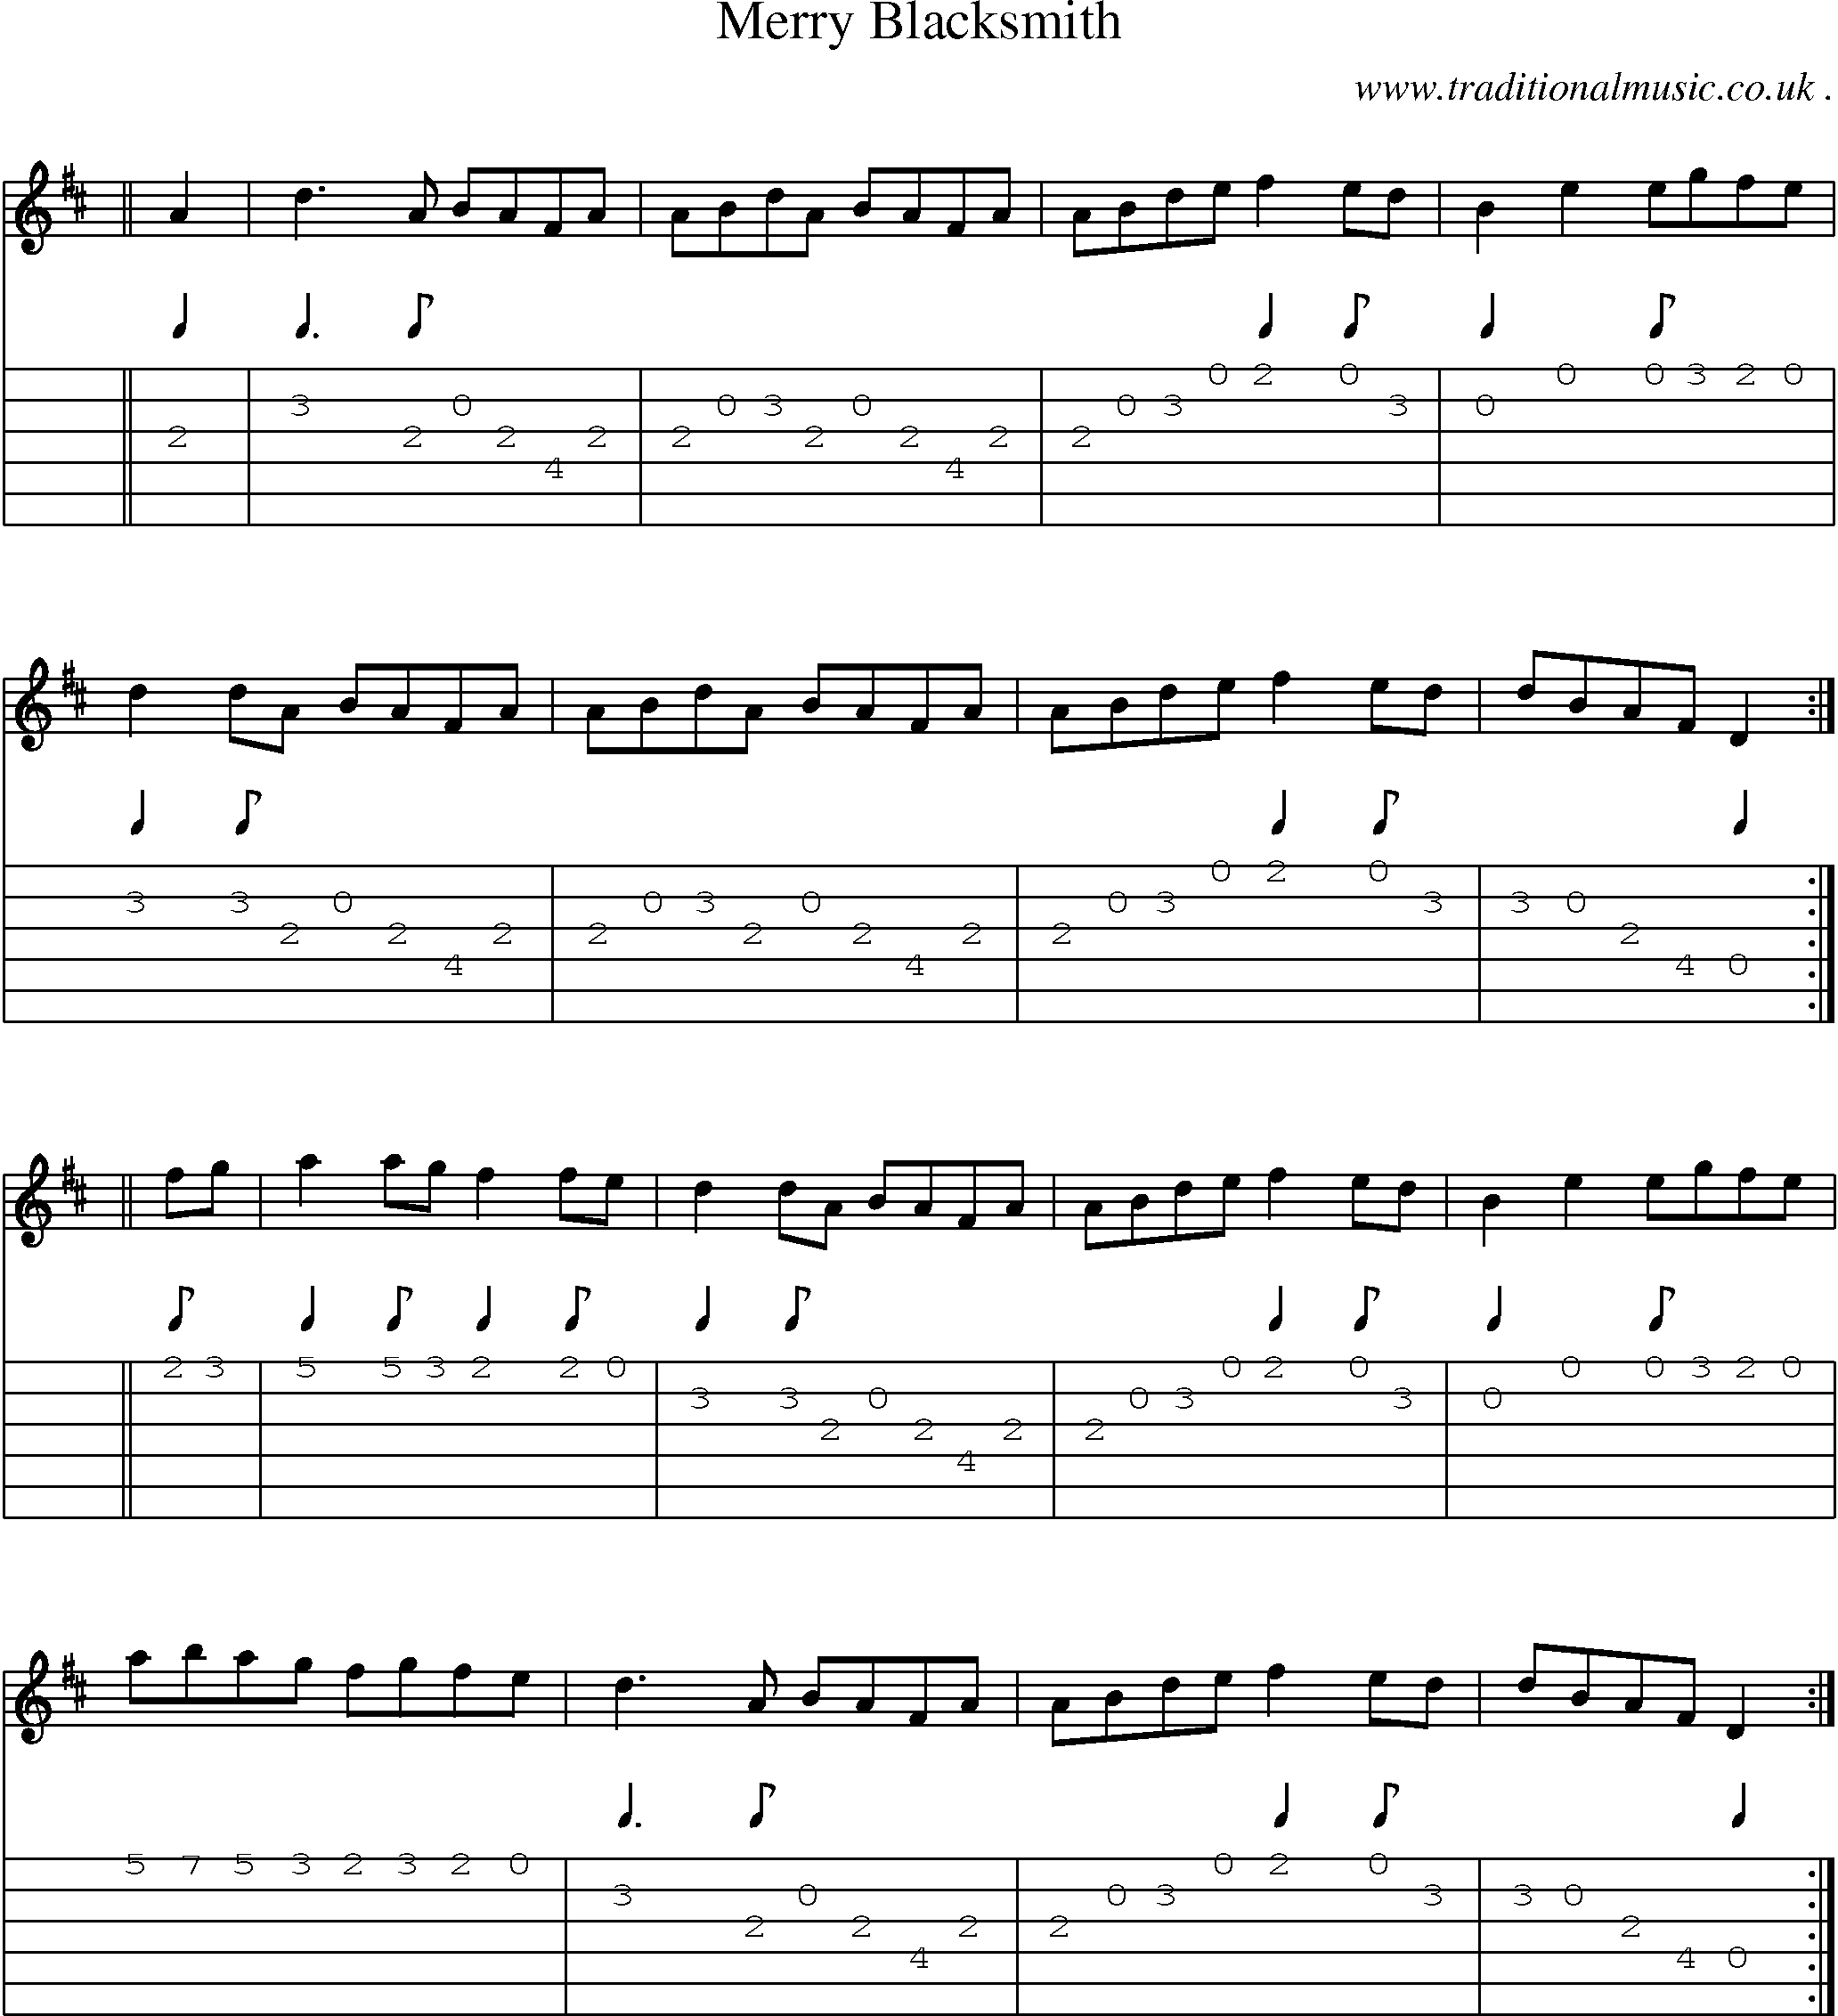 Sheet-Music and Guitar Tabs for Merry Blacksmith